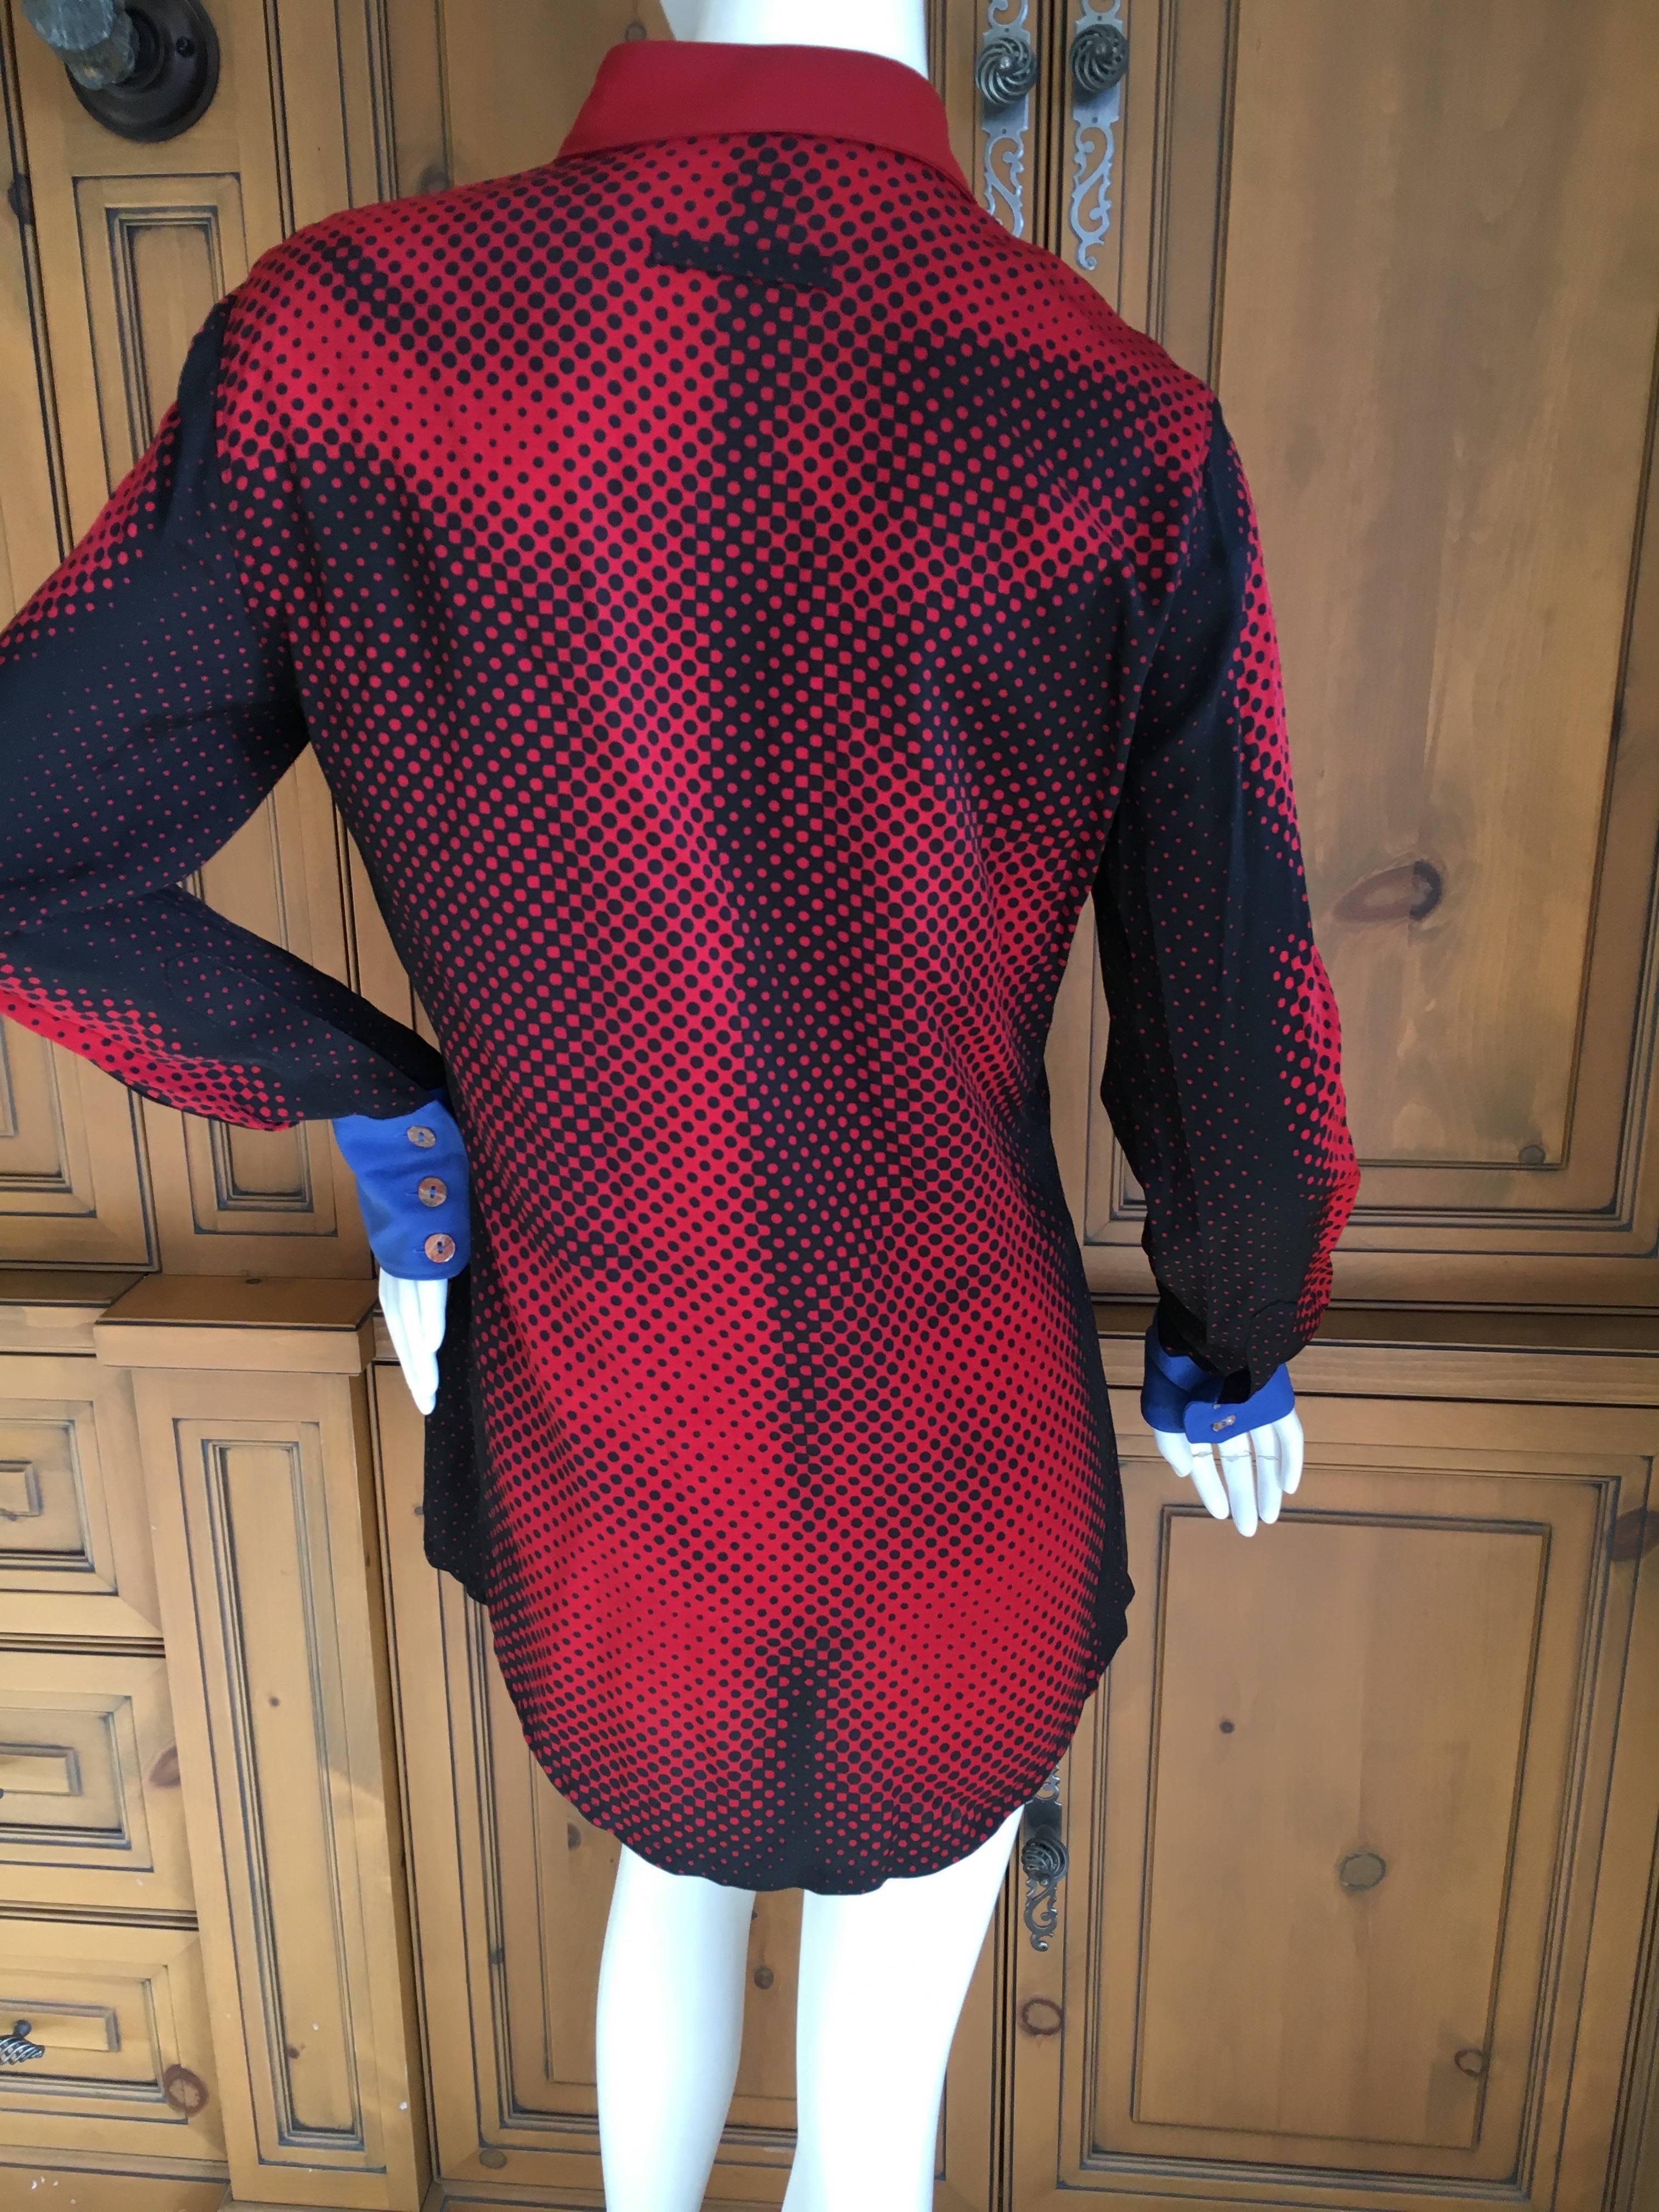 Jean Paul Gaultier Op Art Torso Button Up Blouse In Excellent Condition For Sale In Cloverdale, CA